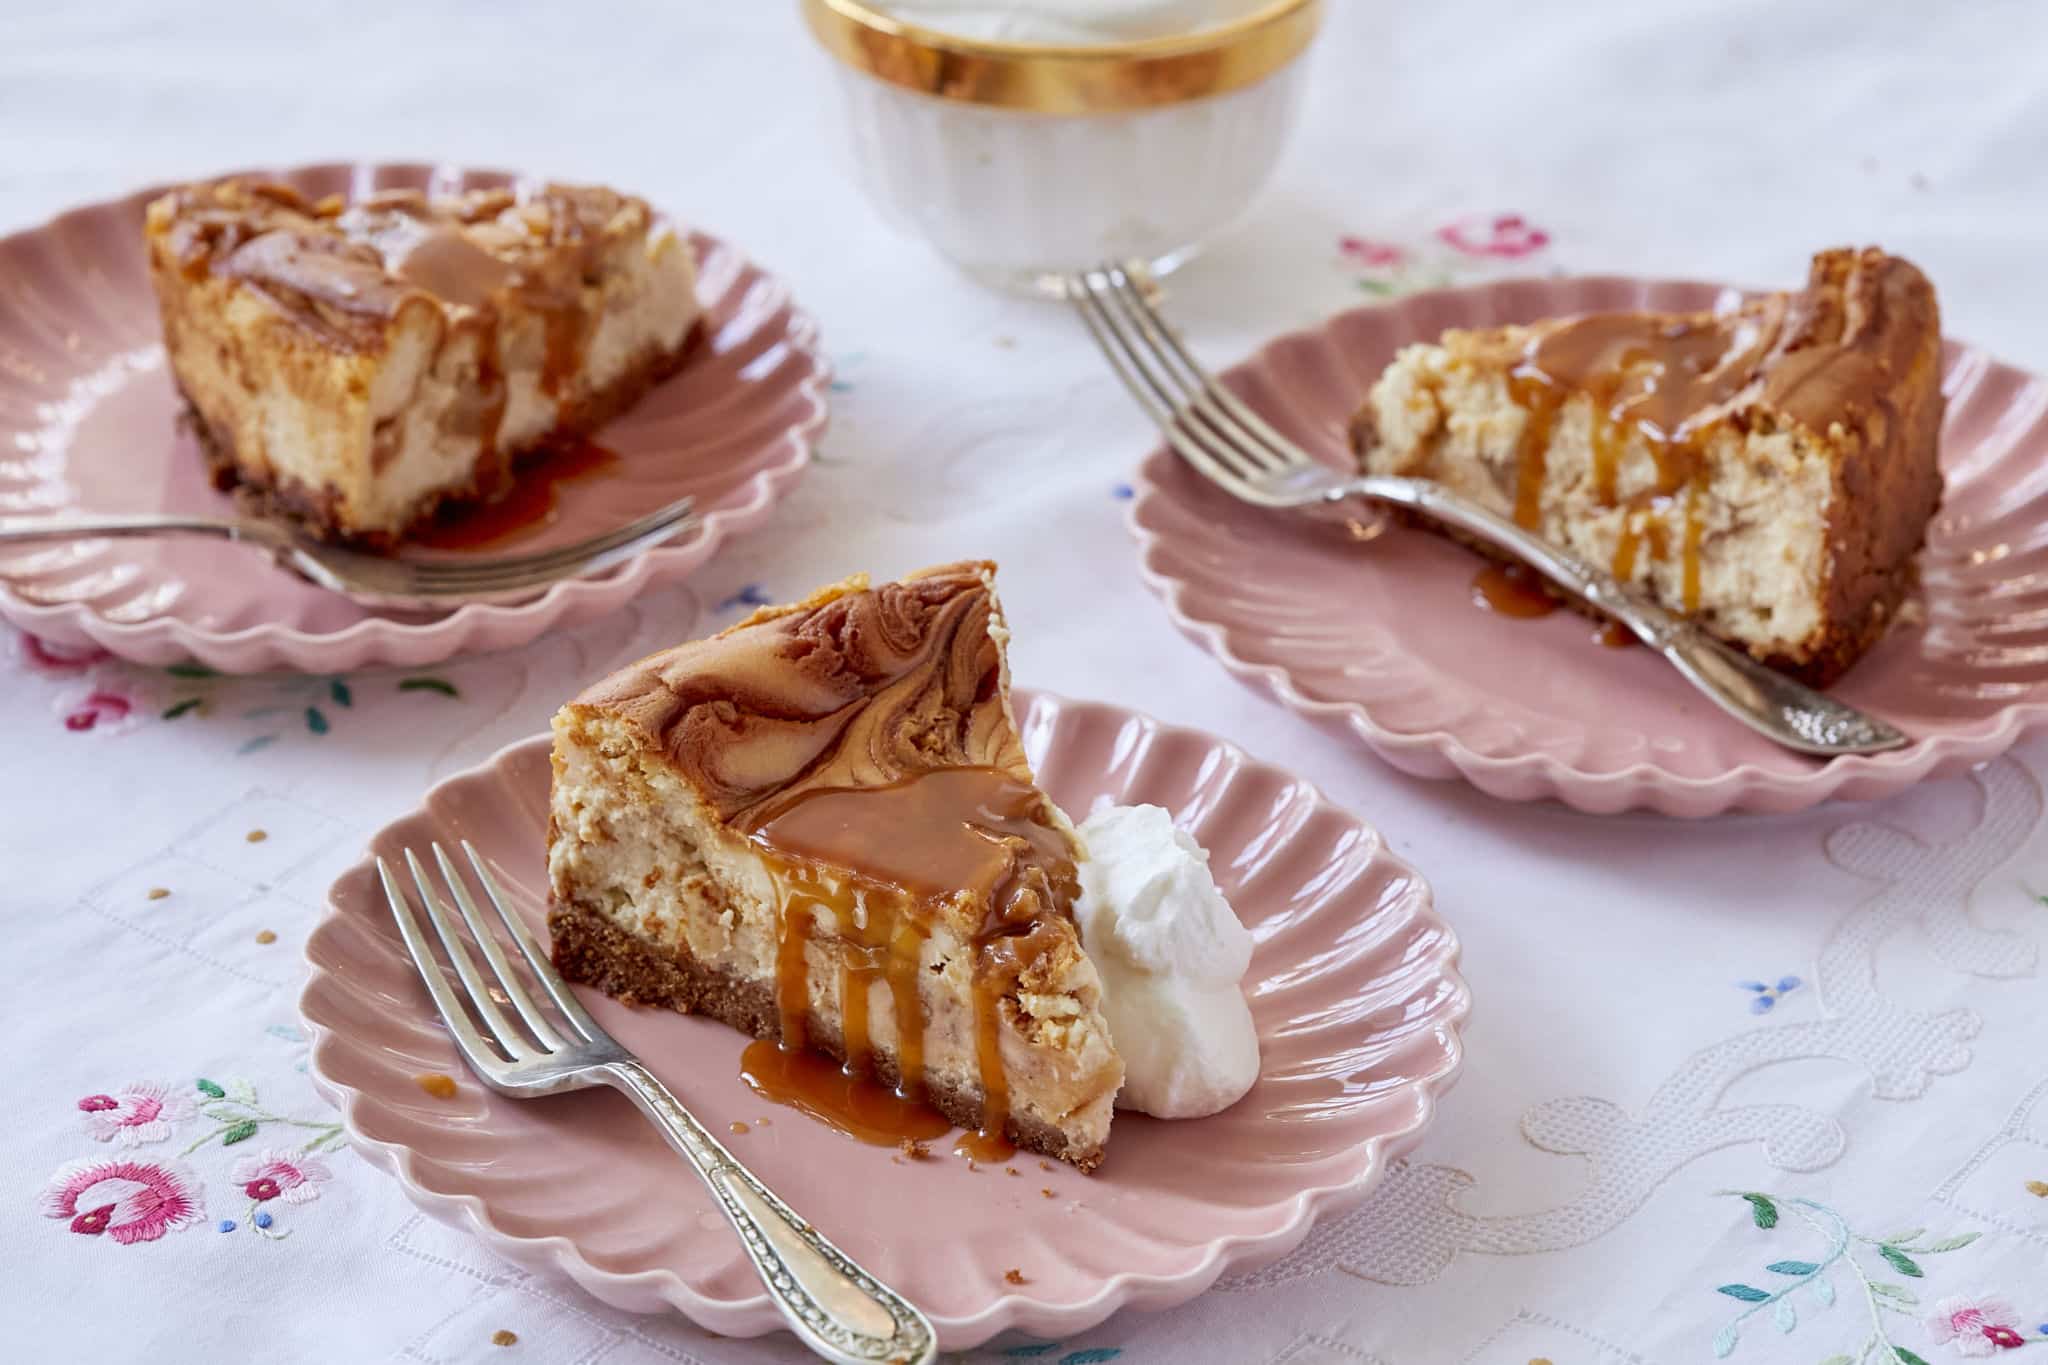 Three slices of homemade Caramel Apple Cheesecake are served on pink plates on a floral table cloth. The cheesecake is moist and jiggly with melted caramel dripping down the sides.